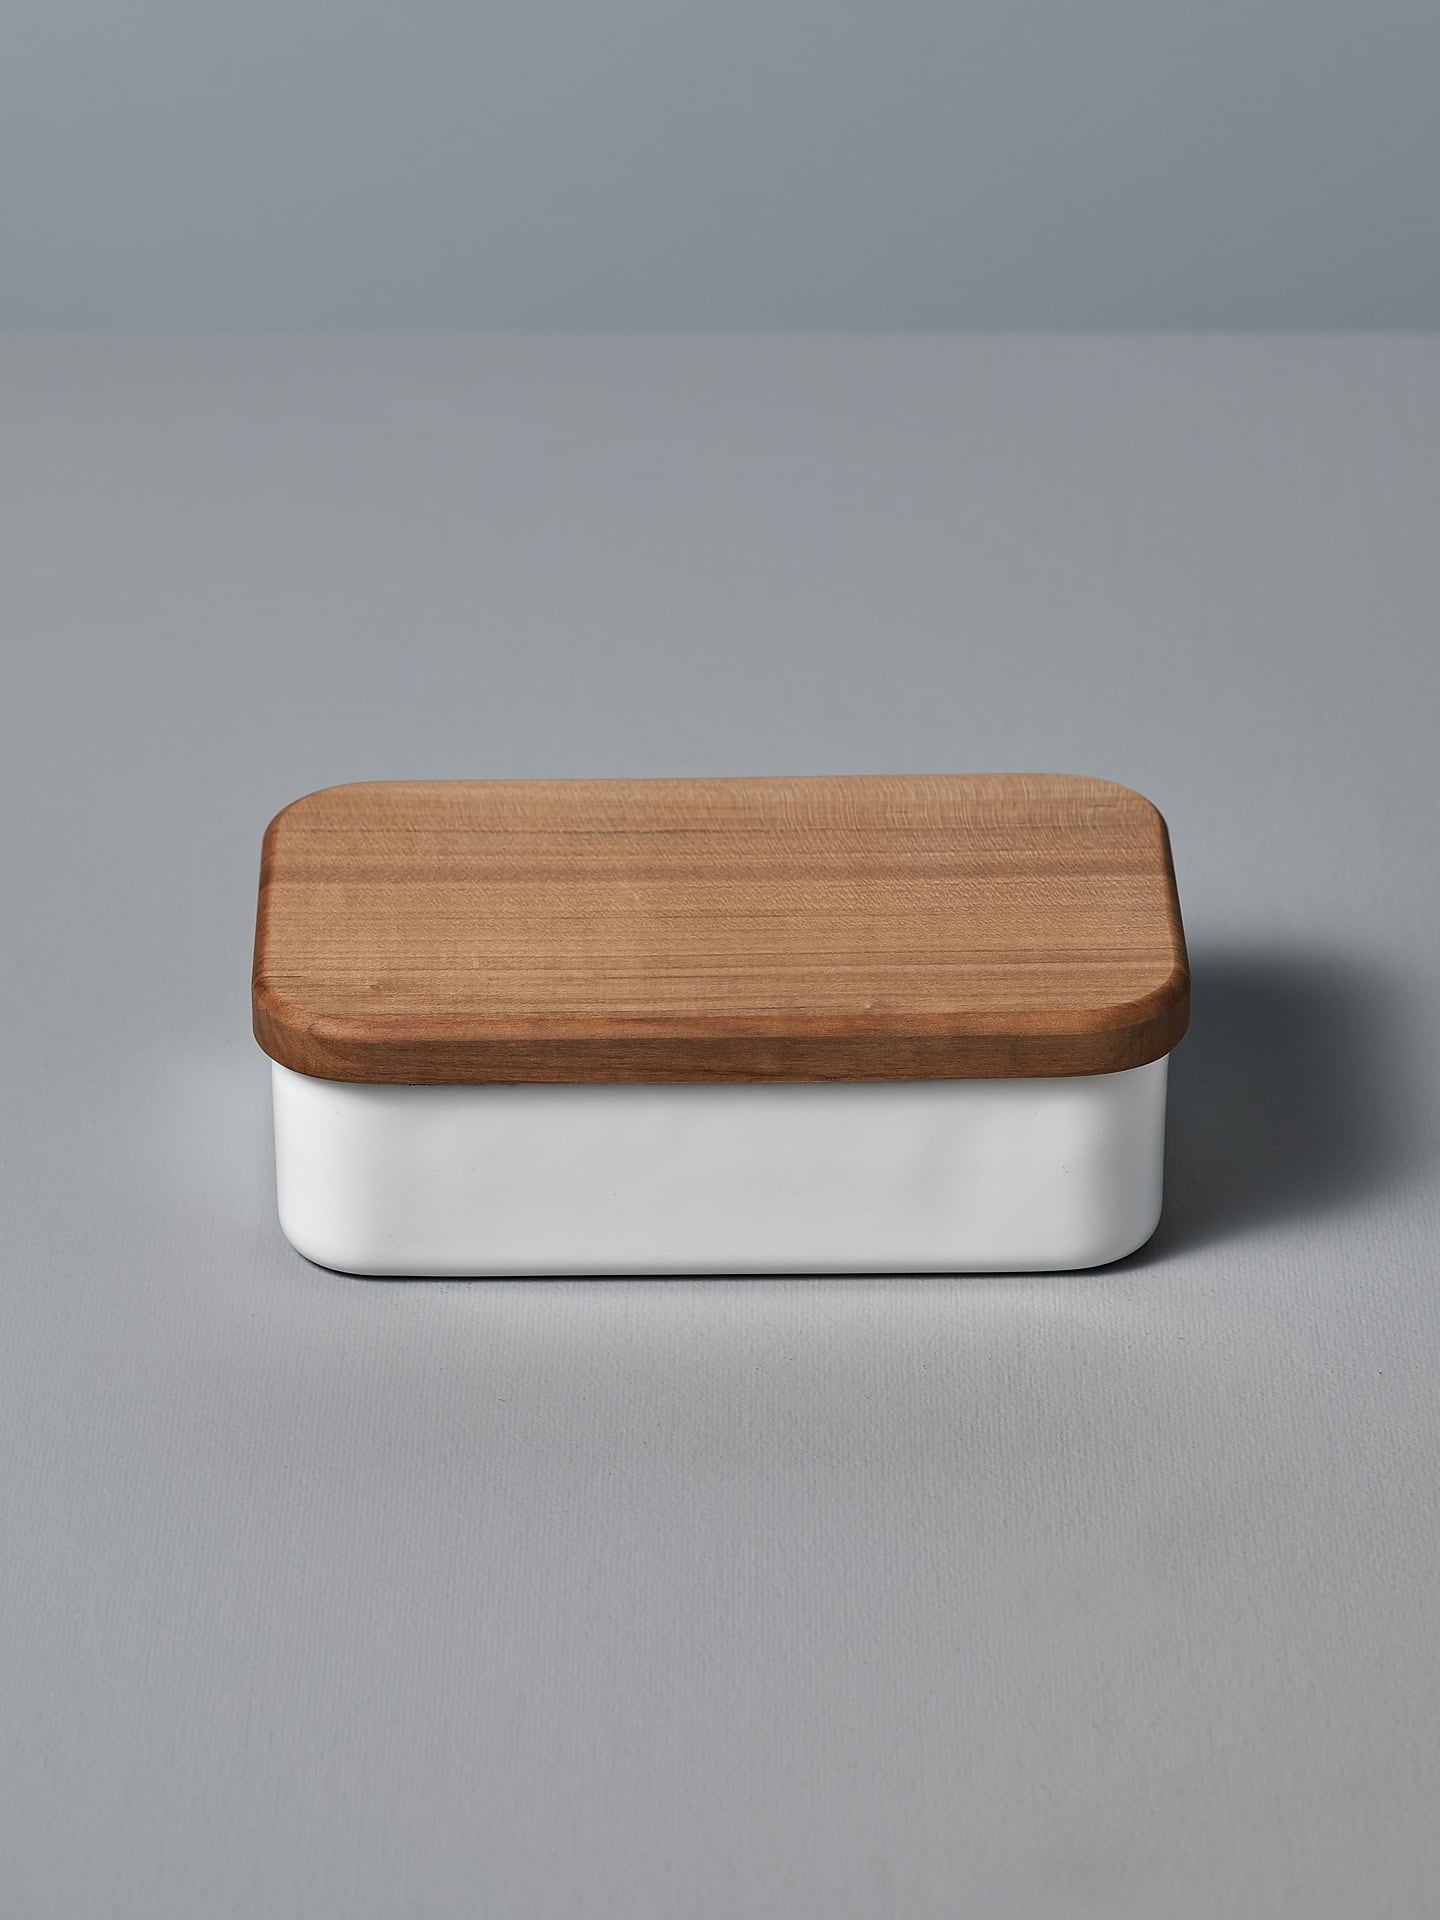 A small white Enamel Butter Case – 200𝚐 with a wooden lid by Noda Horo.